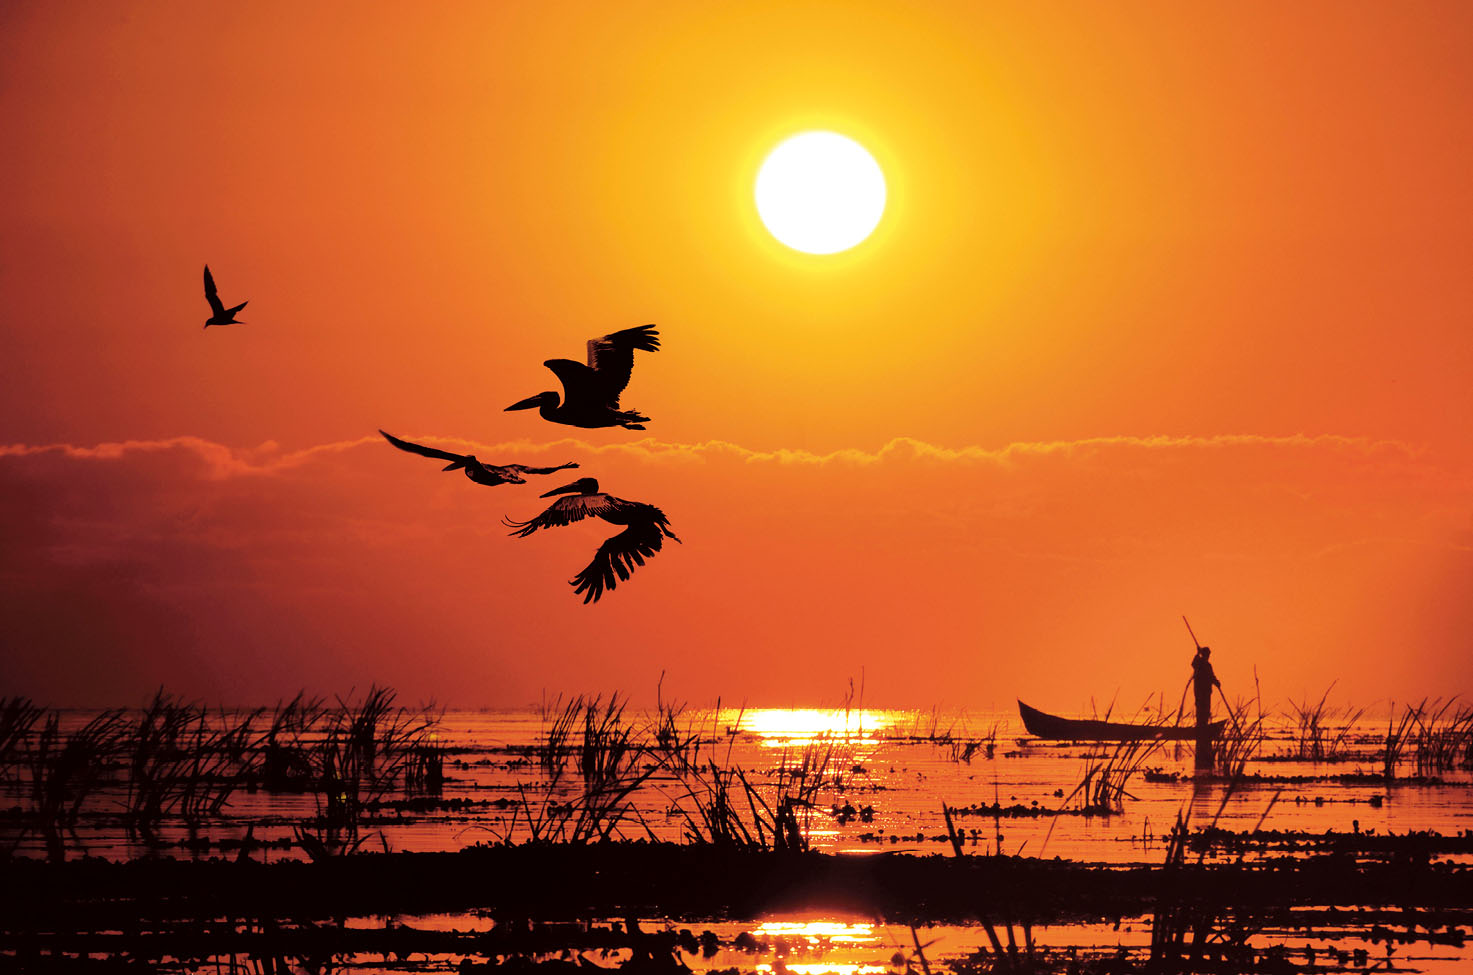 Pelicans flying over the Danube Delta in Romania at sunset. 